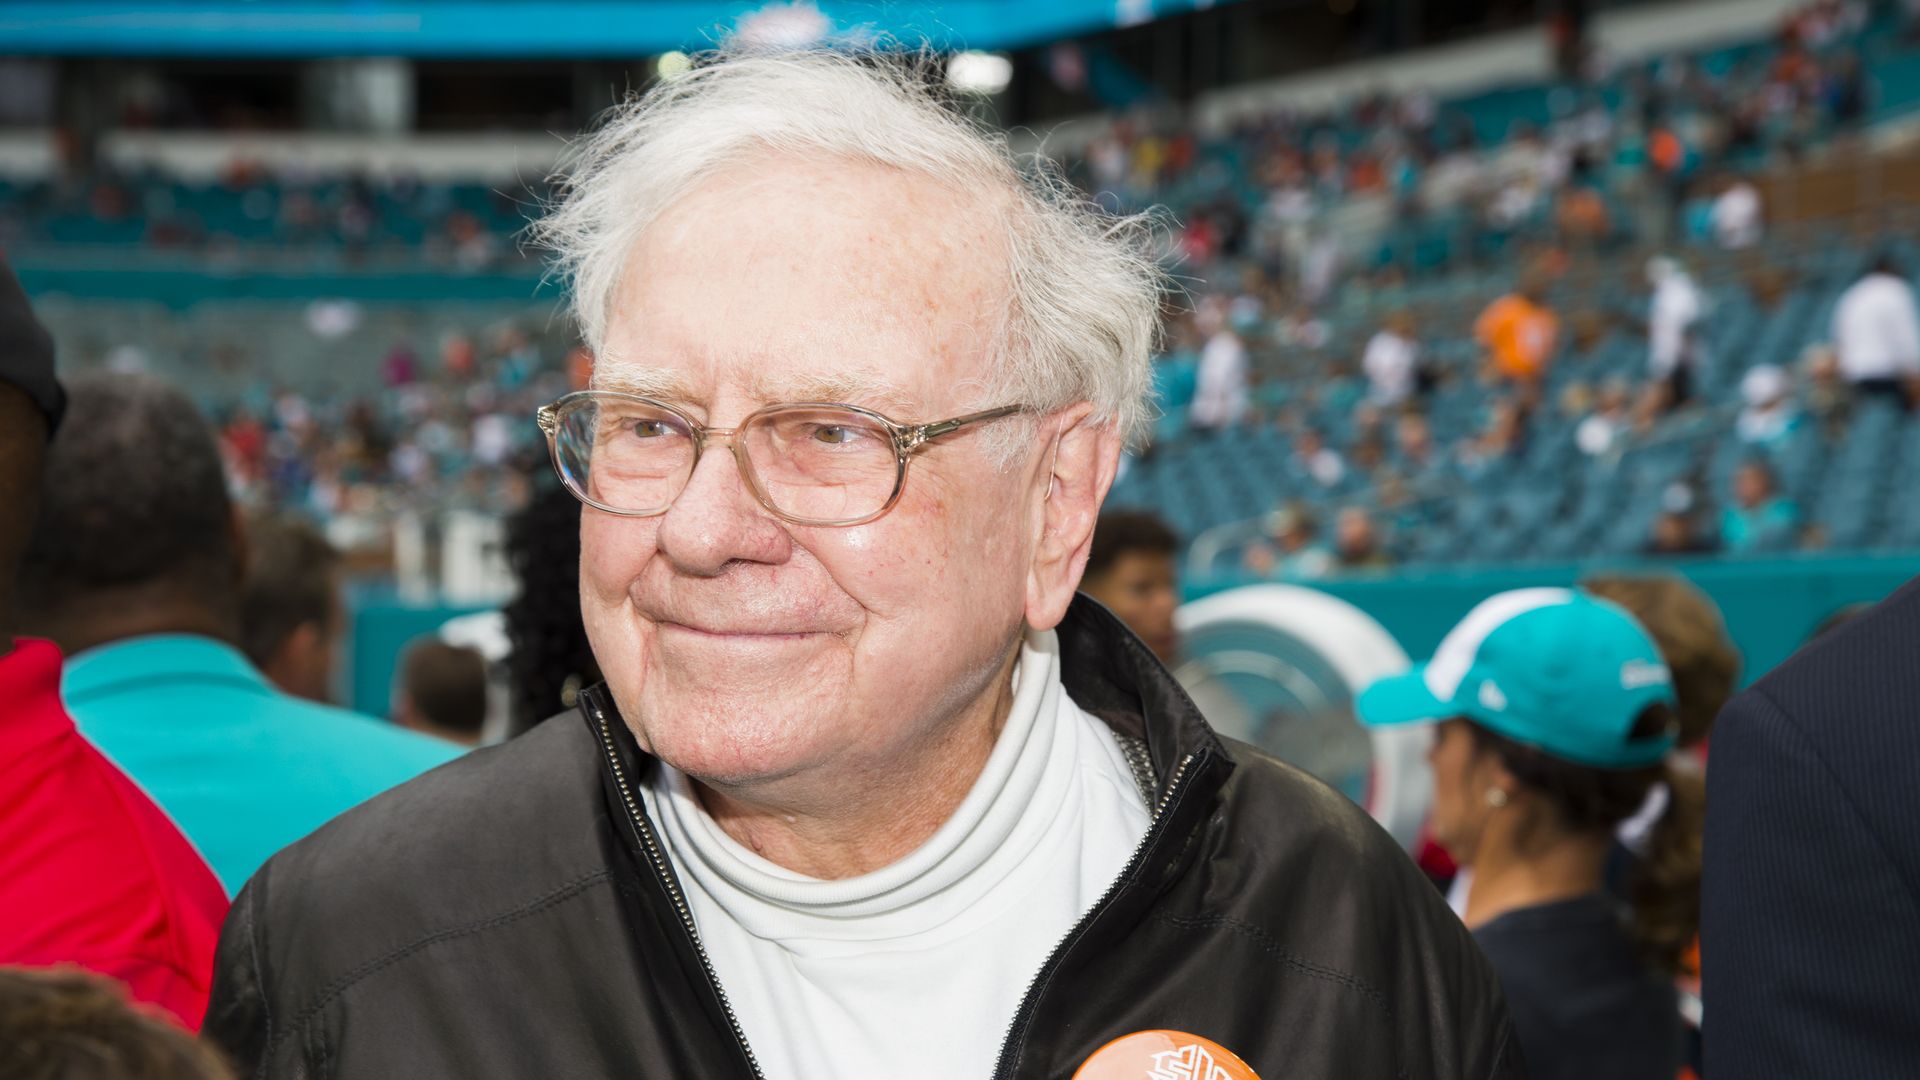  Warren Buffett  on the sidelines before the start of the NFL football game between the Arizona Cardinals and the Miami Dolphins on December 11, 2016 in Miami Gardens, FL.